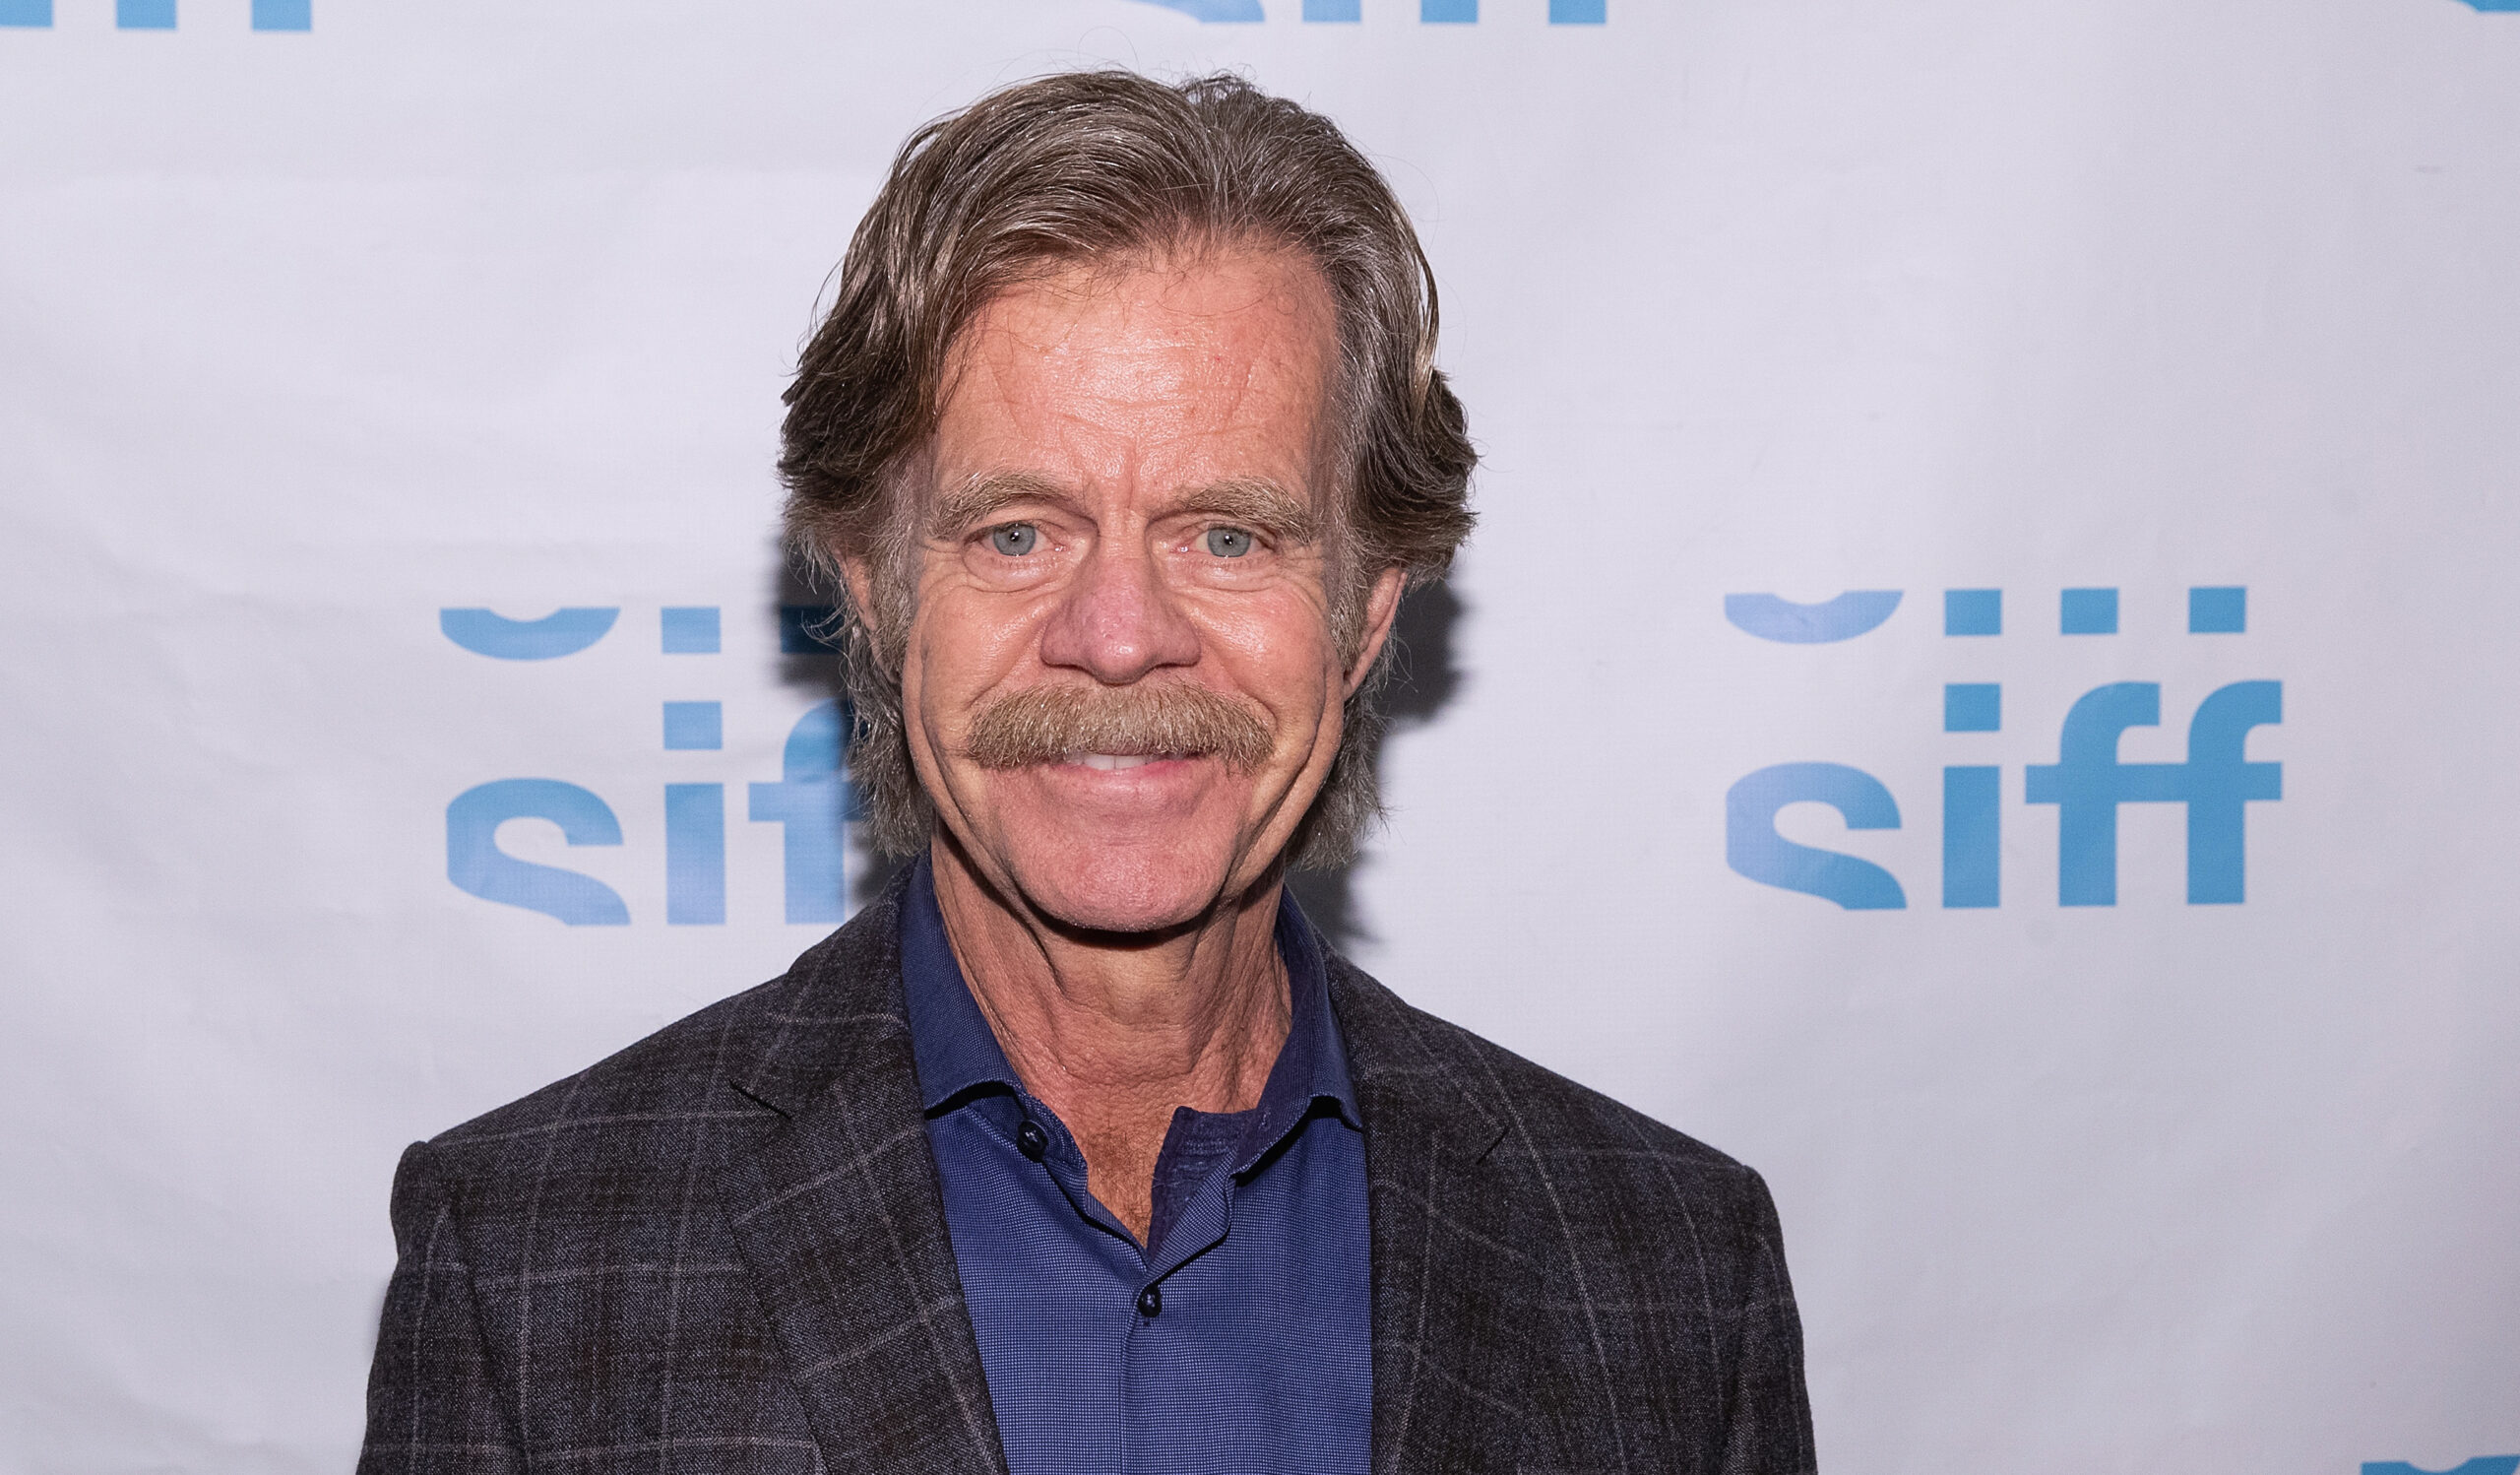 William H. Macy believes Hollywood’s excessive violence is harming the world